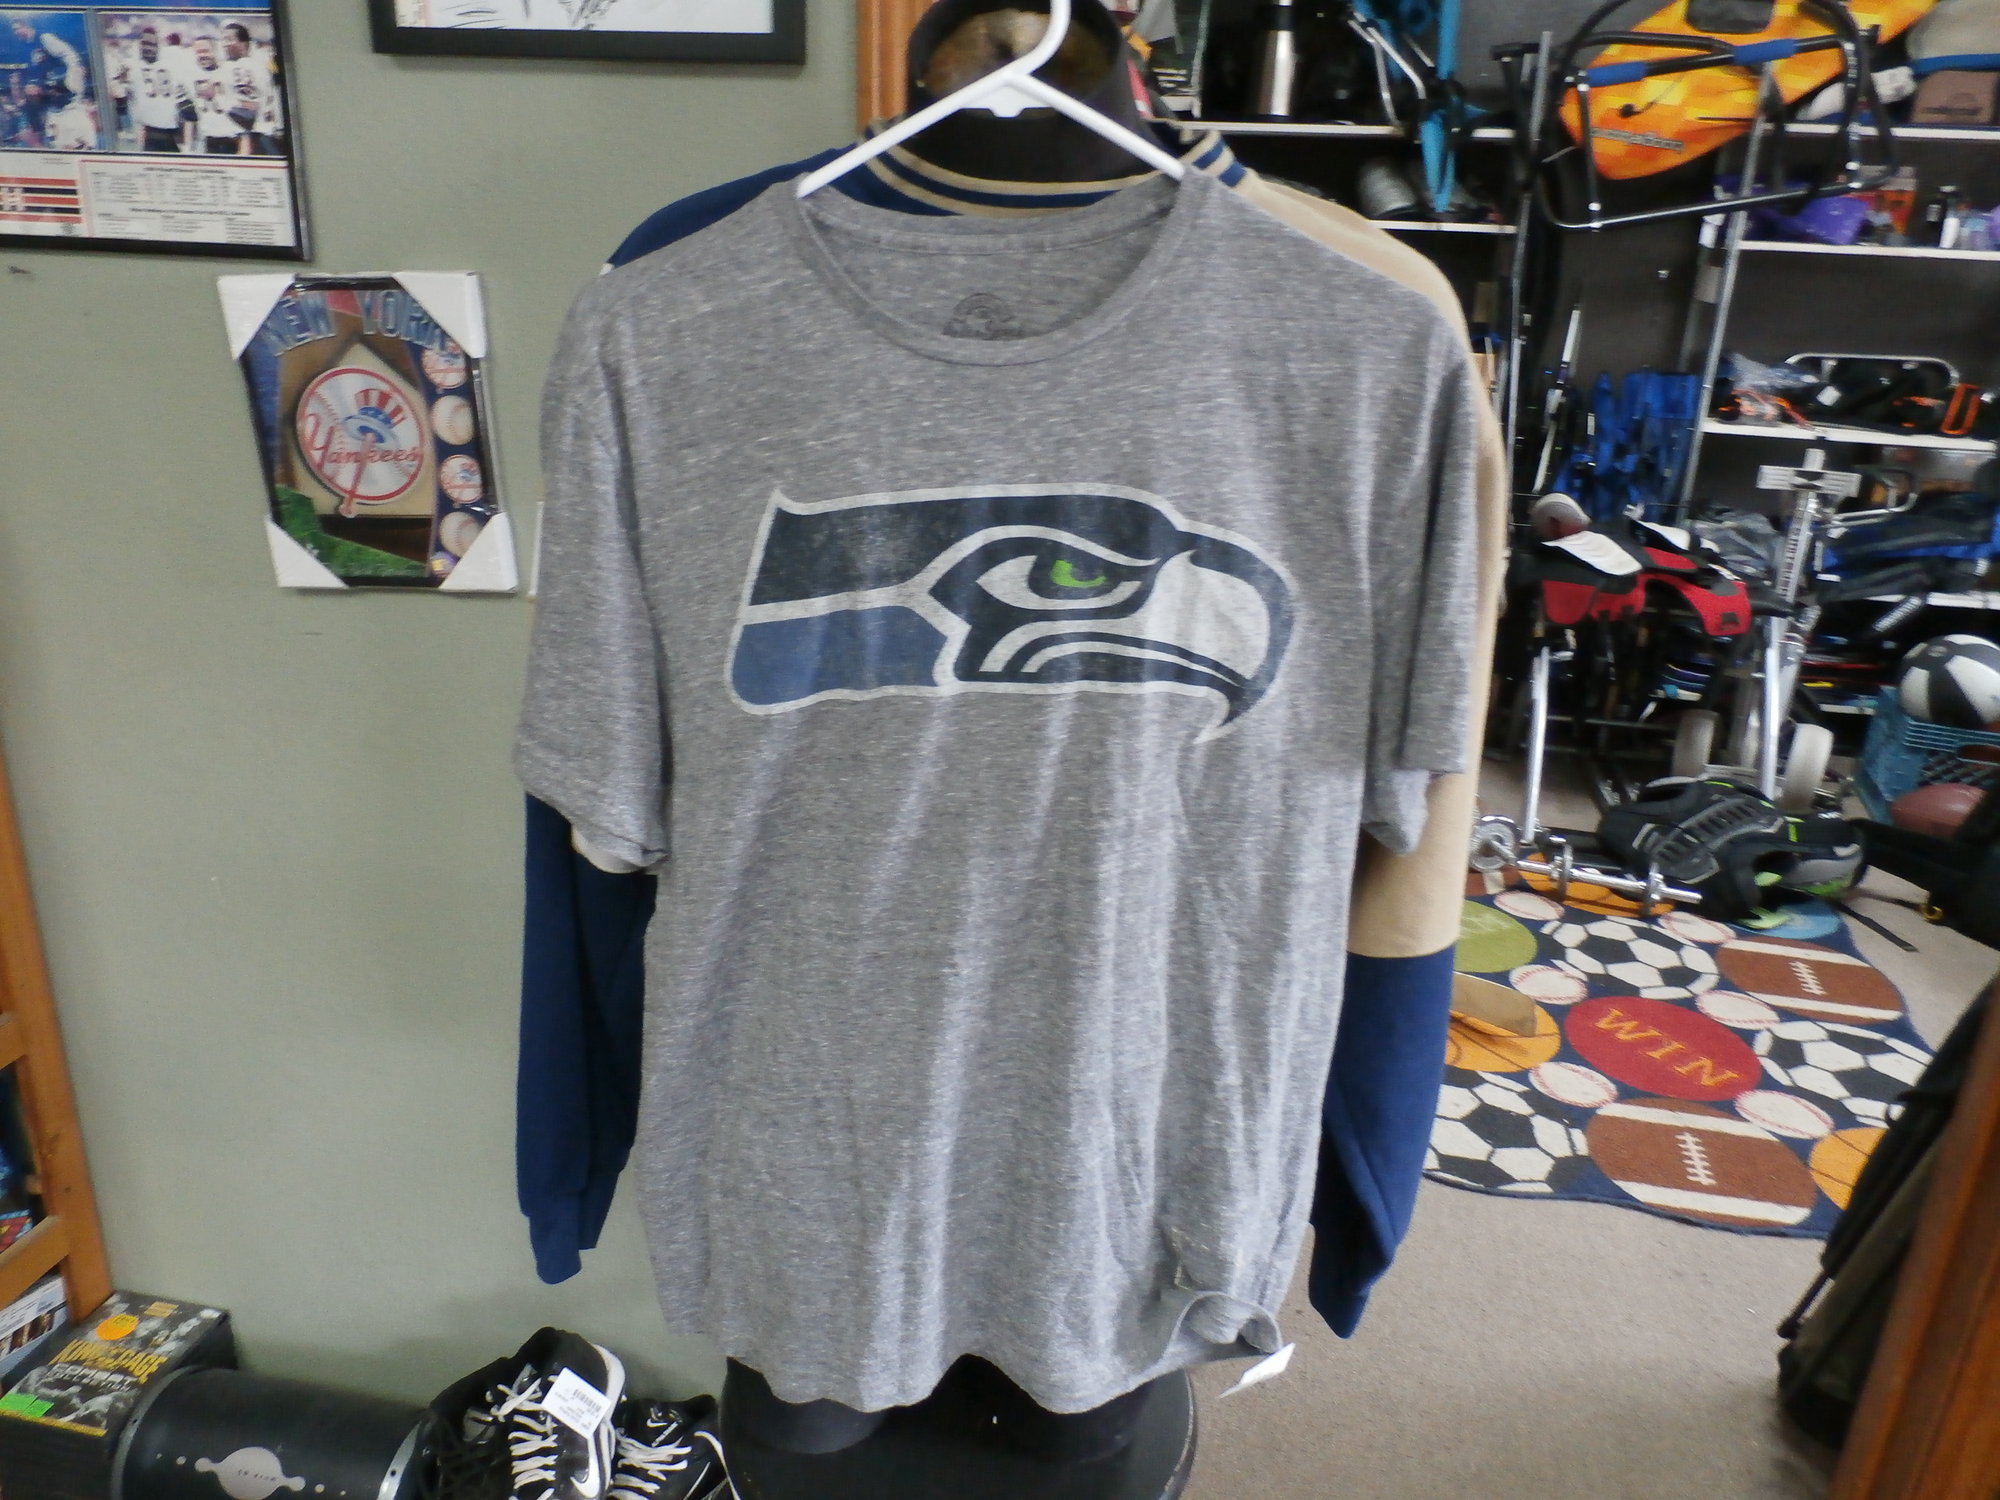 Title: Seattle Seahawks T shirt gray size Large #22284
Our Clothes Rating: 4- Fair Condition
Brand: Retro Sport
size: Men's Large (Chest: 20\" Length: 26\")
color: Gray
Style: basic screen pressed t shirt
Condition: 4- Fair- worn and faded; noticeable pilling and fuzz; front stitched on logo is missing; the front logo is cracked, faded and wearing off; material is faded, discolored and partially see through from washing, use and age;
Shipping: FREE
Item #: 22284